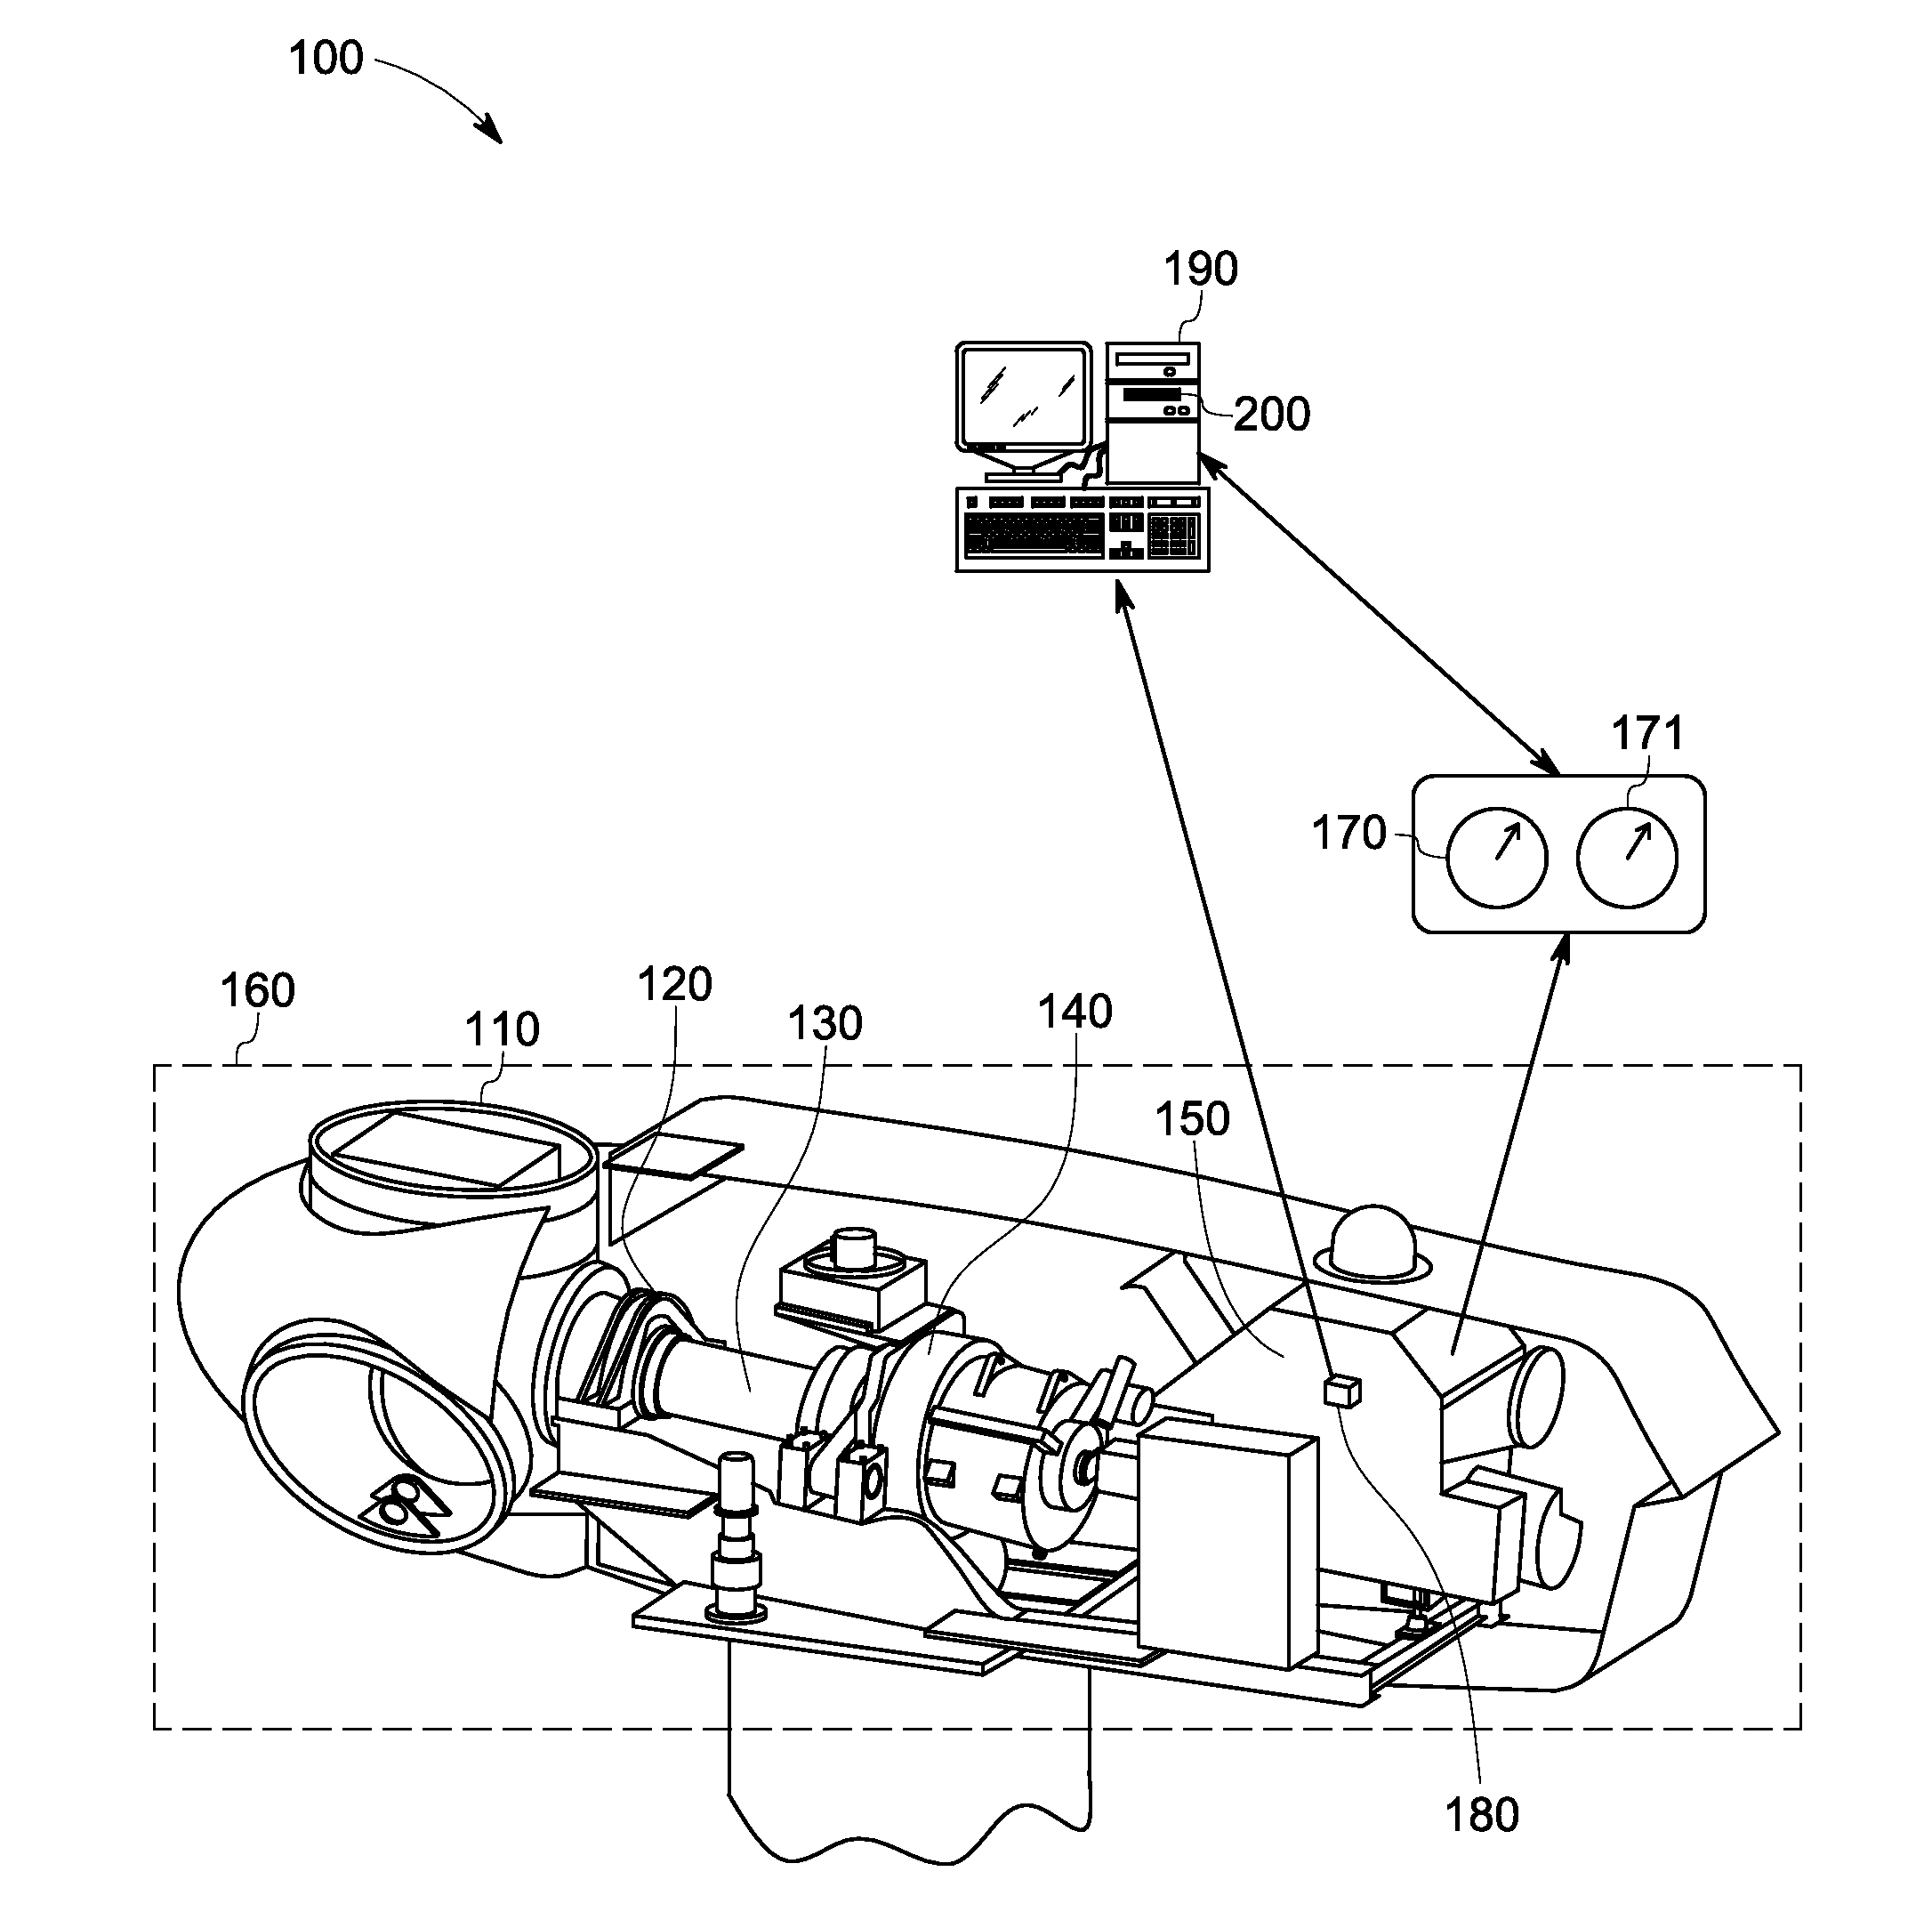 Fault detection system and associated method